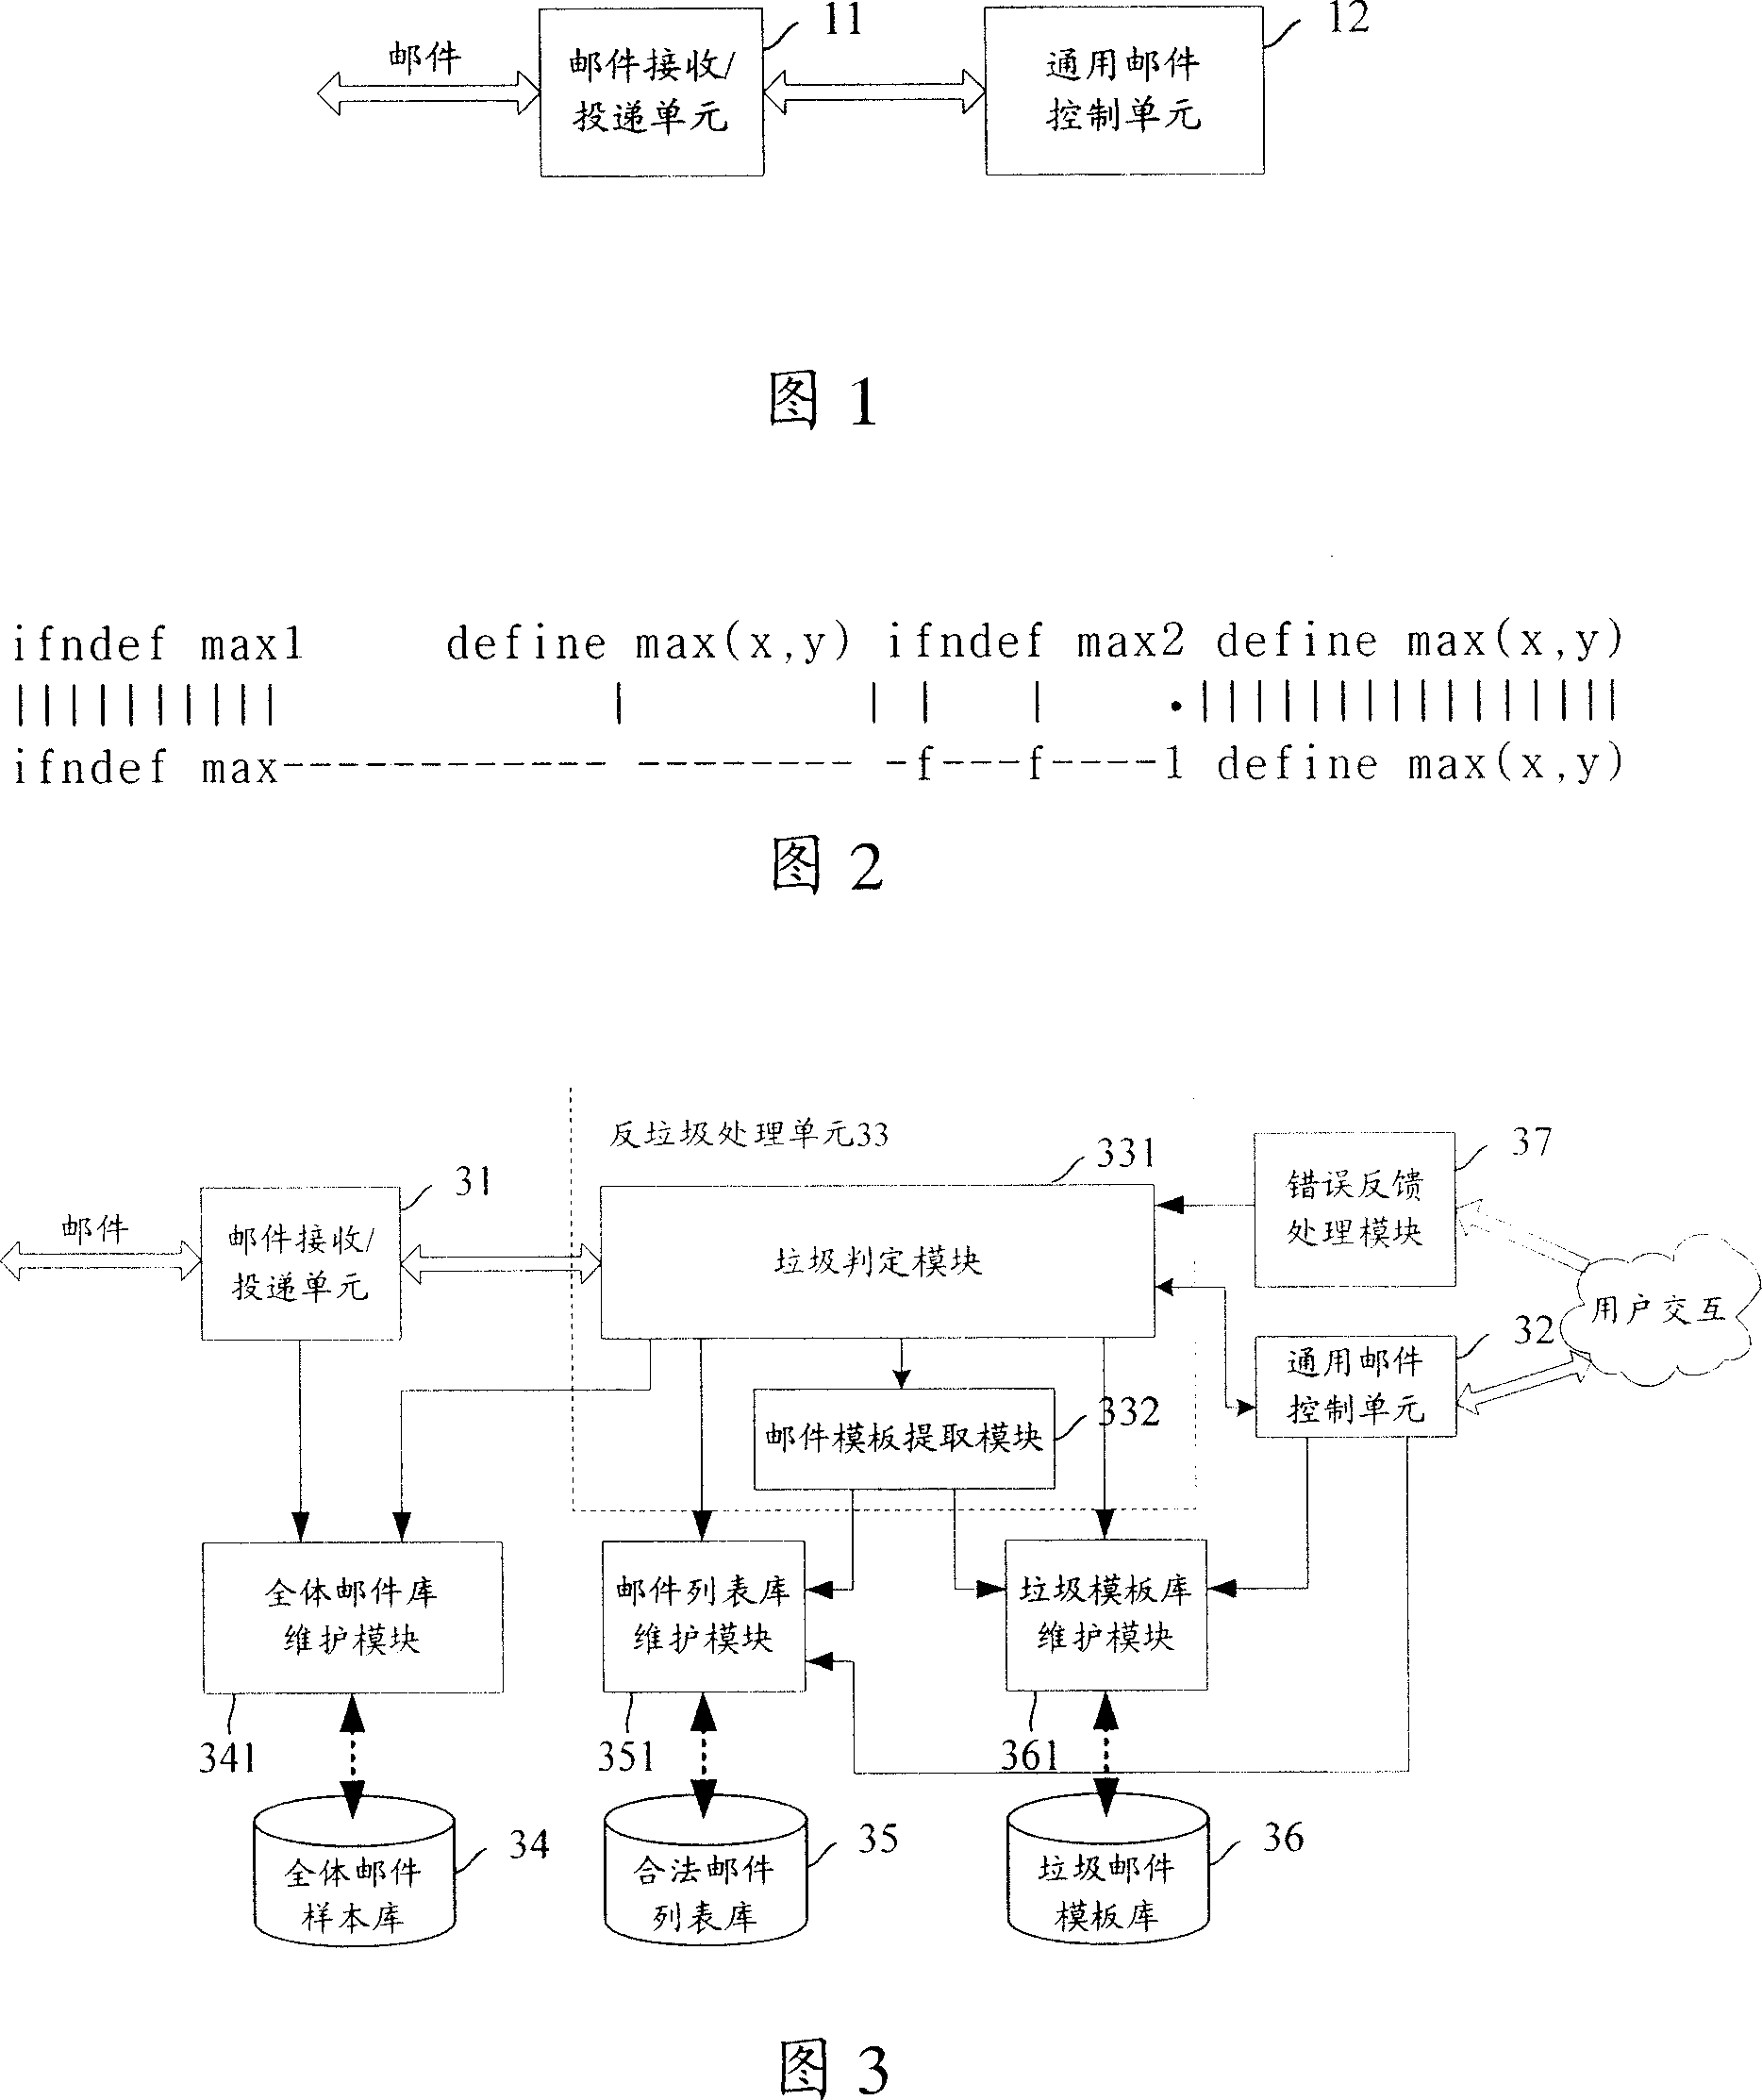 Processing device and method for anti-junk mails